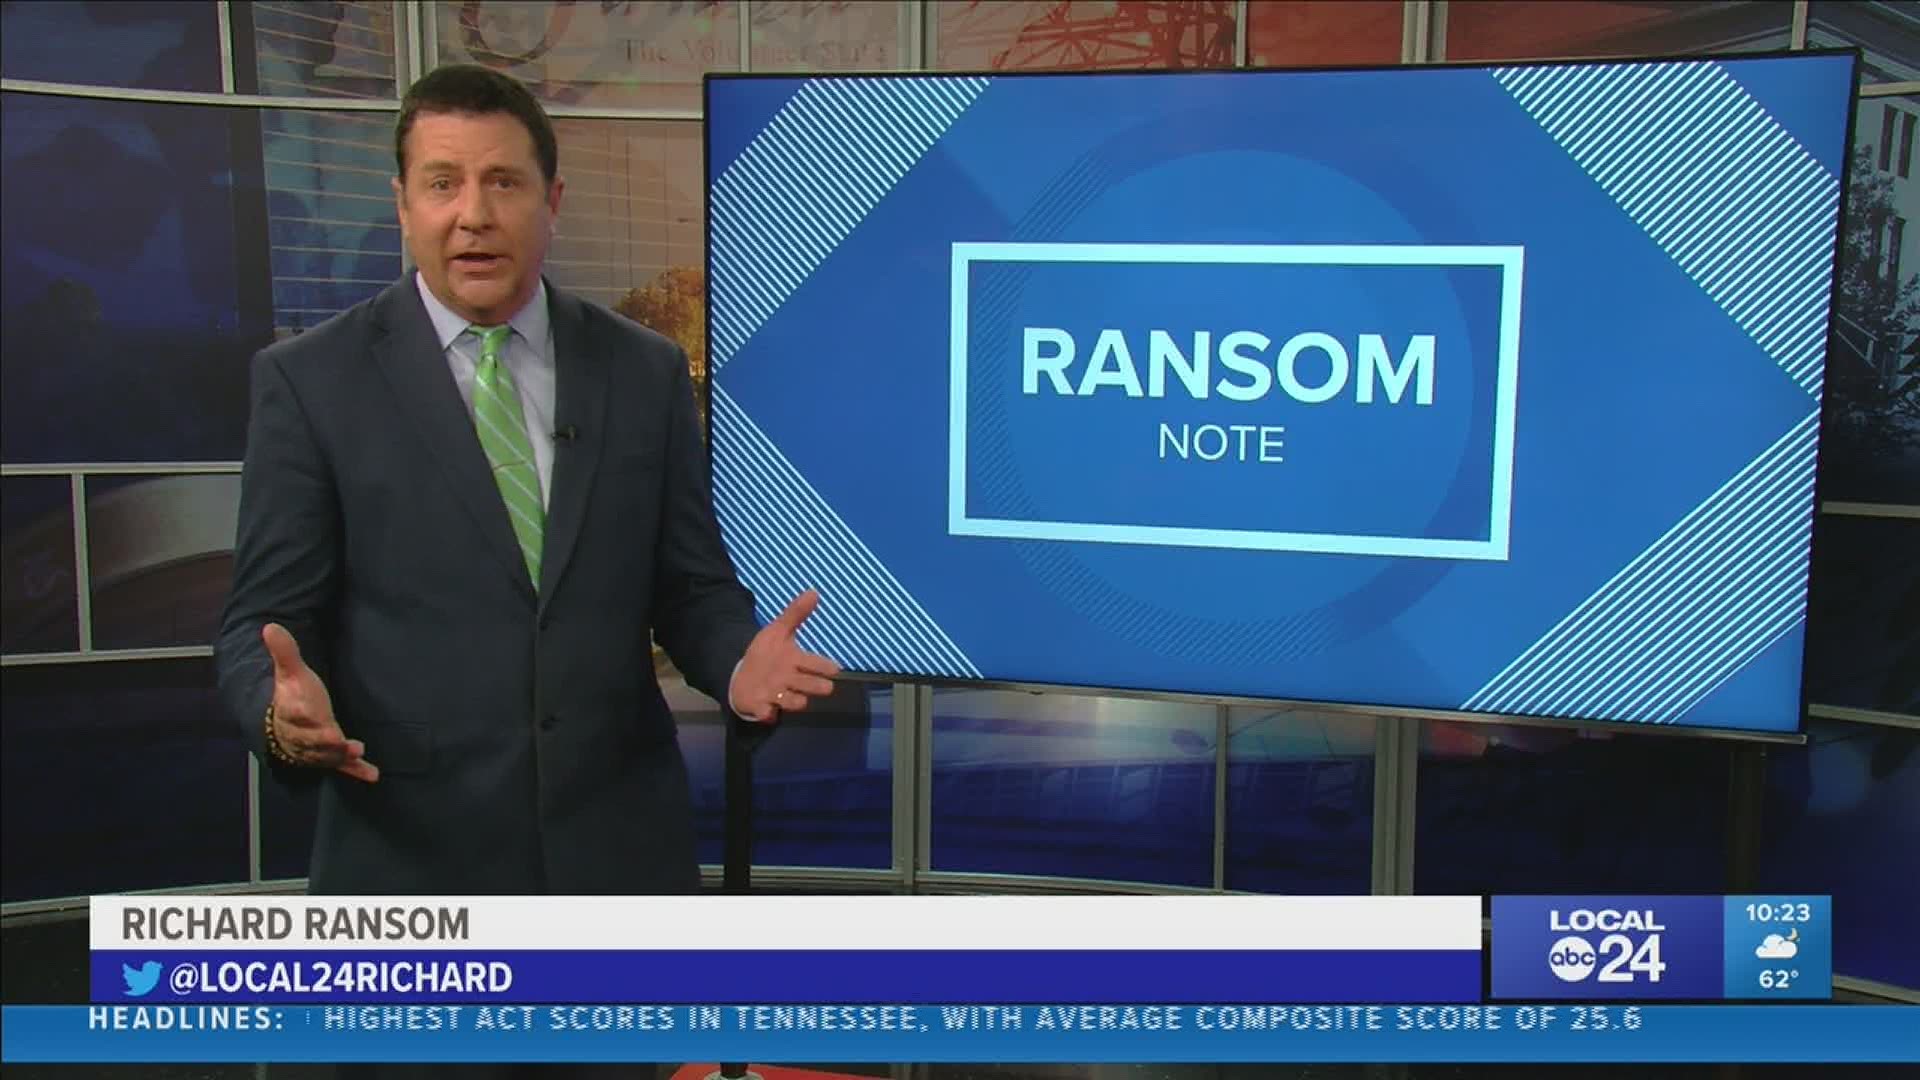 Local 24 News Anchor Richard Ransom discusses in his Ransom Note about the local school's and their ACT scores.